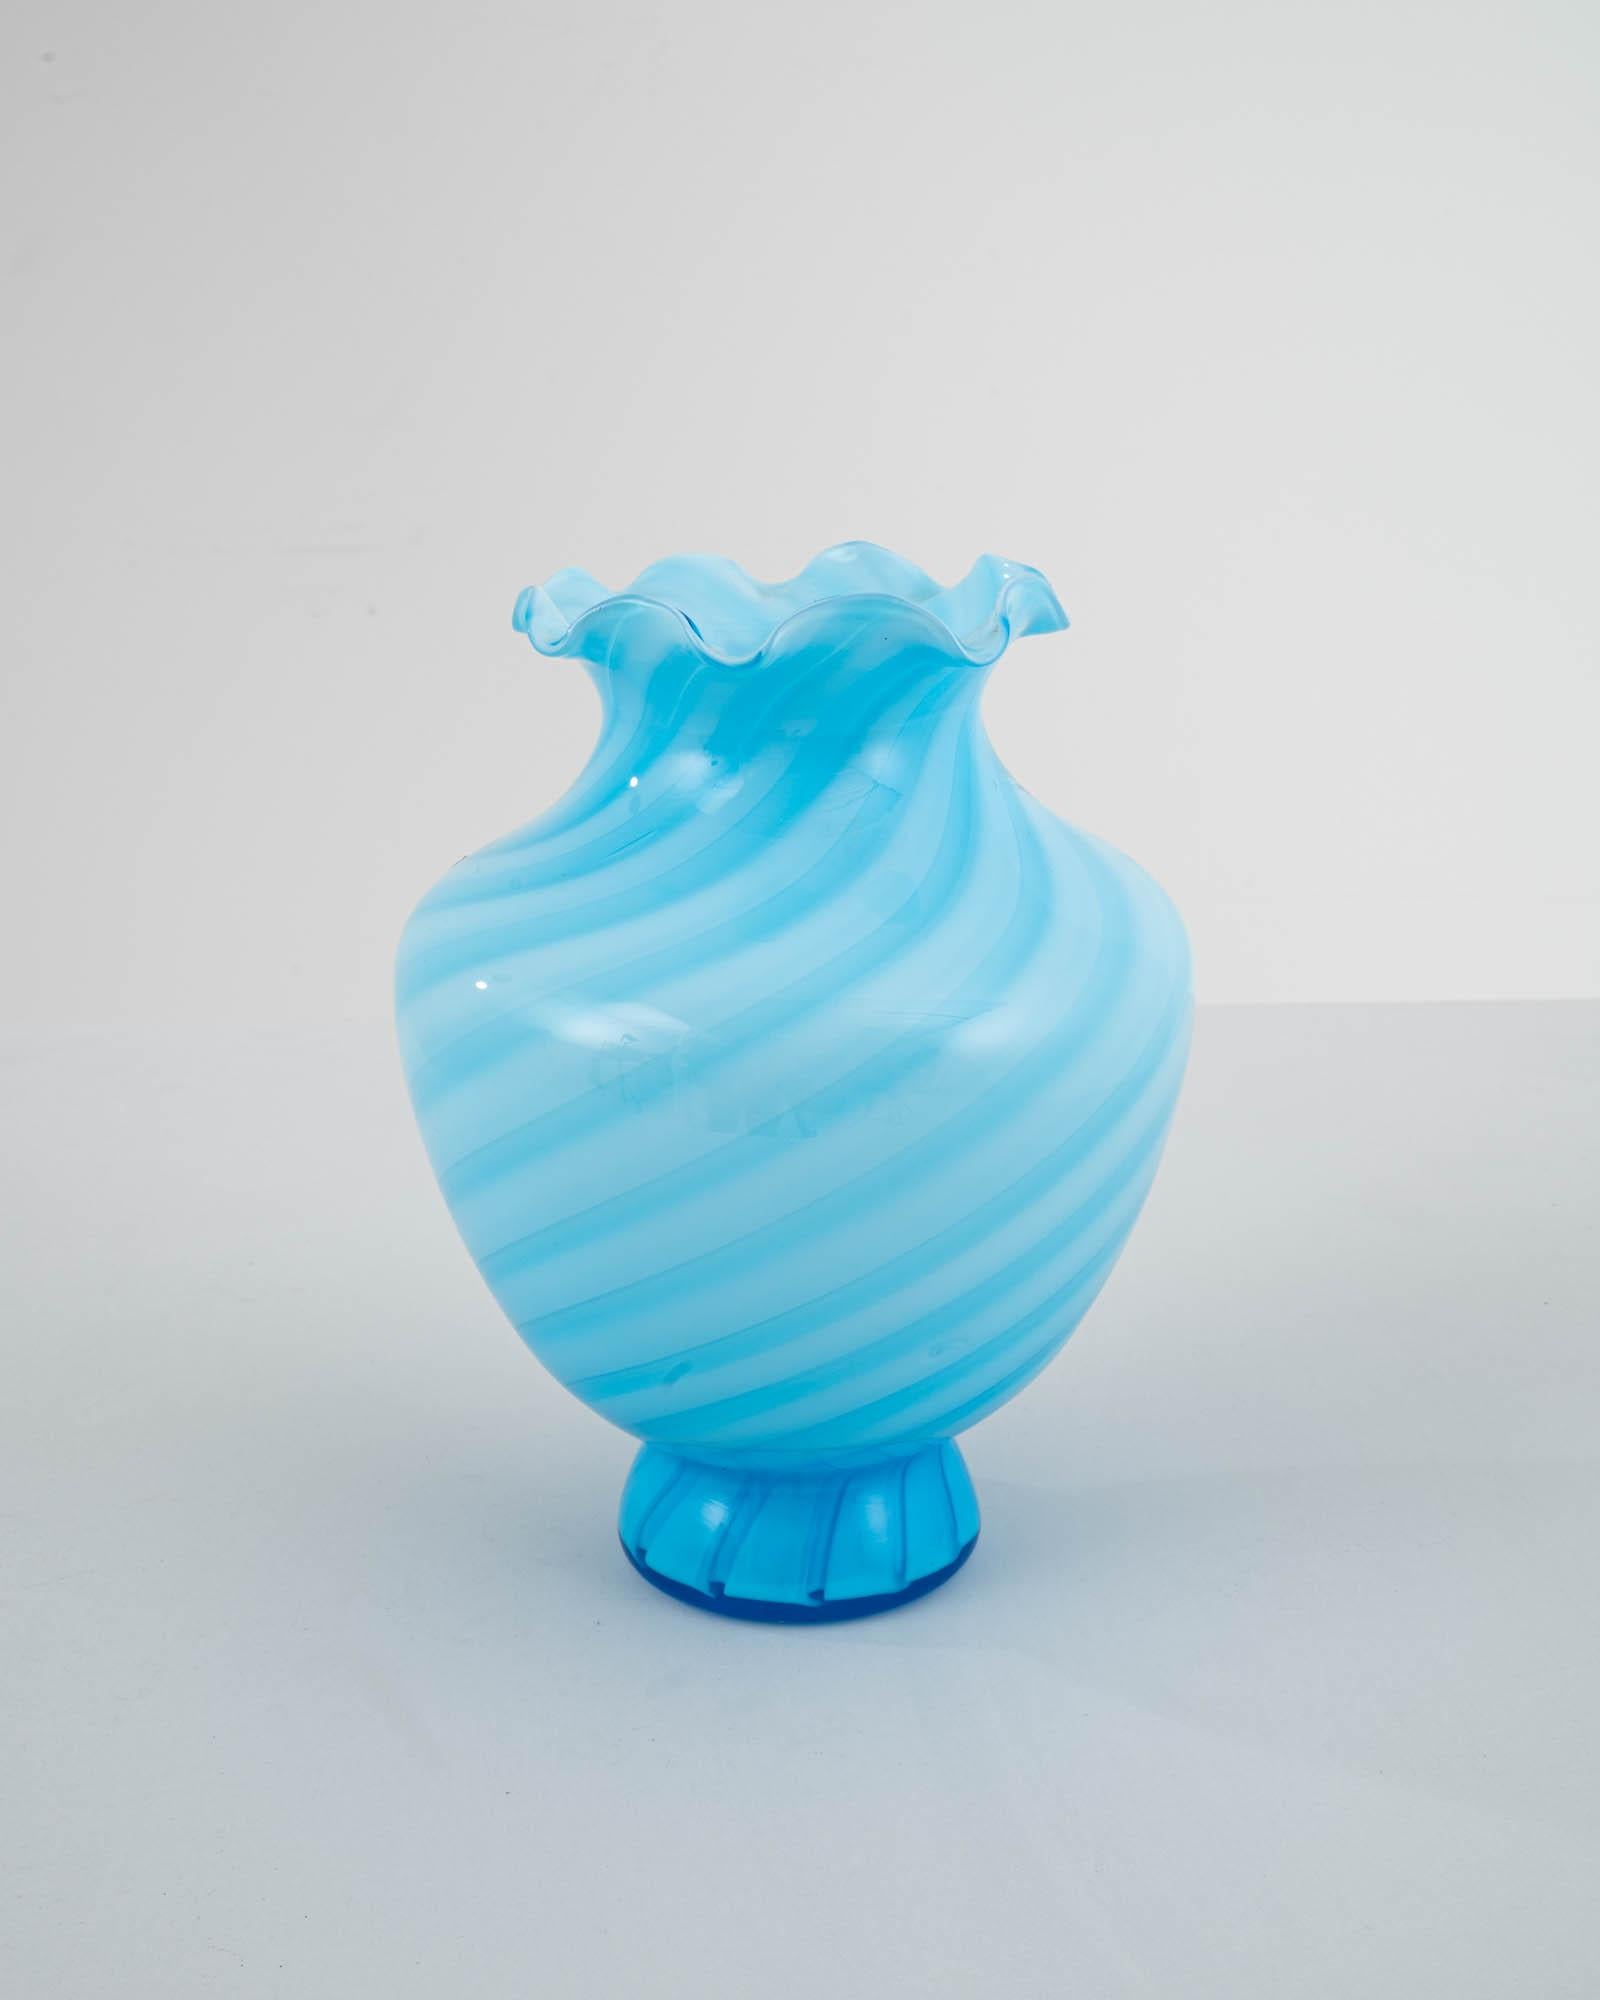 A beautifully crafted glass vase tinted in a light blue shade with a small metallic sticker indicating the maker. Both a decoration by itself or a vase for a bouquet, this piece comes from twentieth Century Italy, where glass working —both as